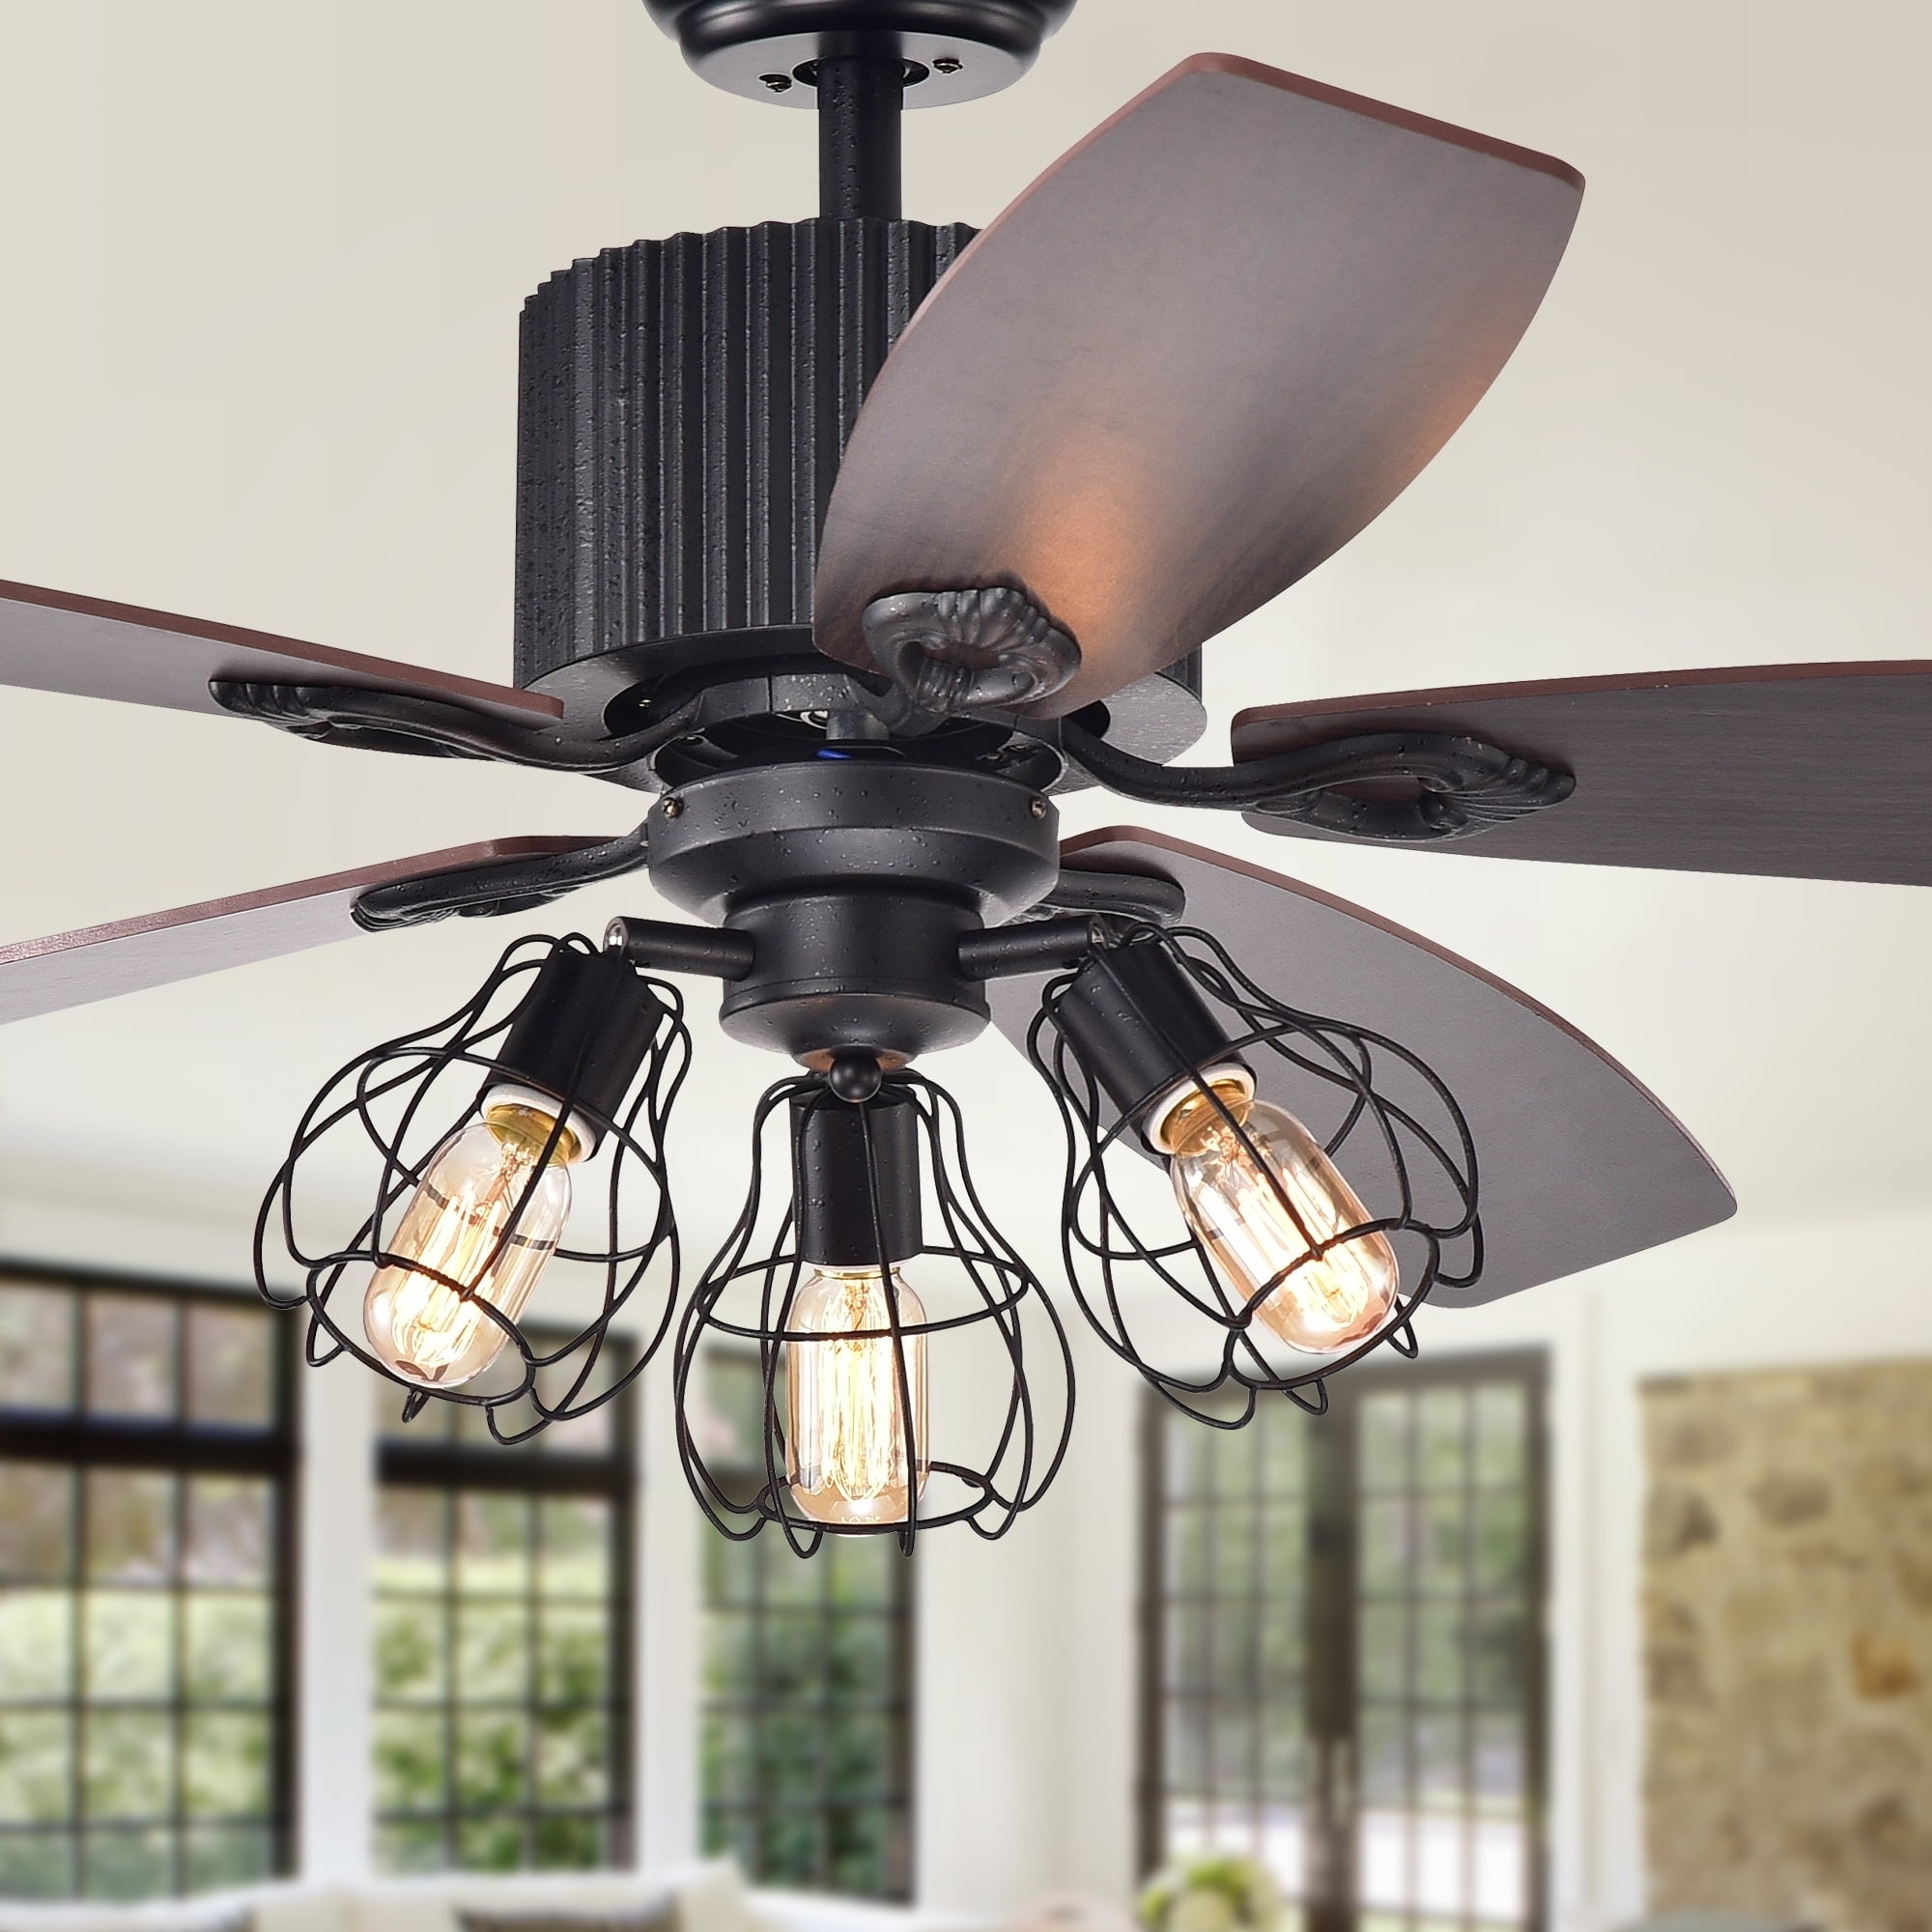 Cornelius Forged Black 3-Light 52-Inch Lighted Ceiling Fan (incl. Remote & 2 Color Option Blades)